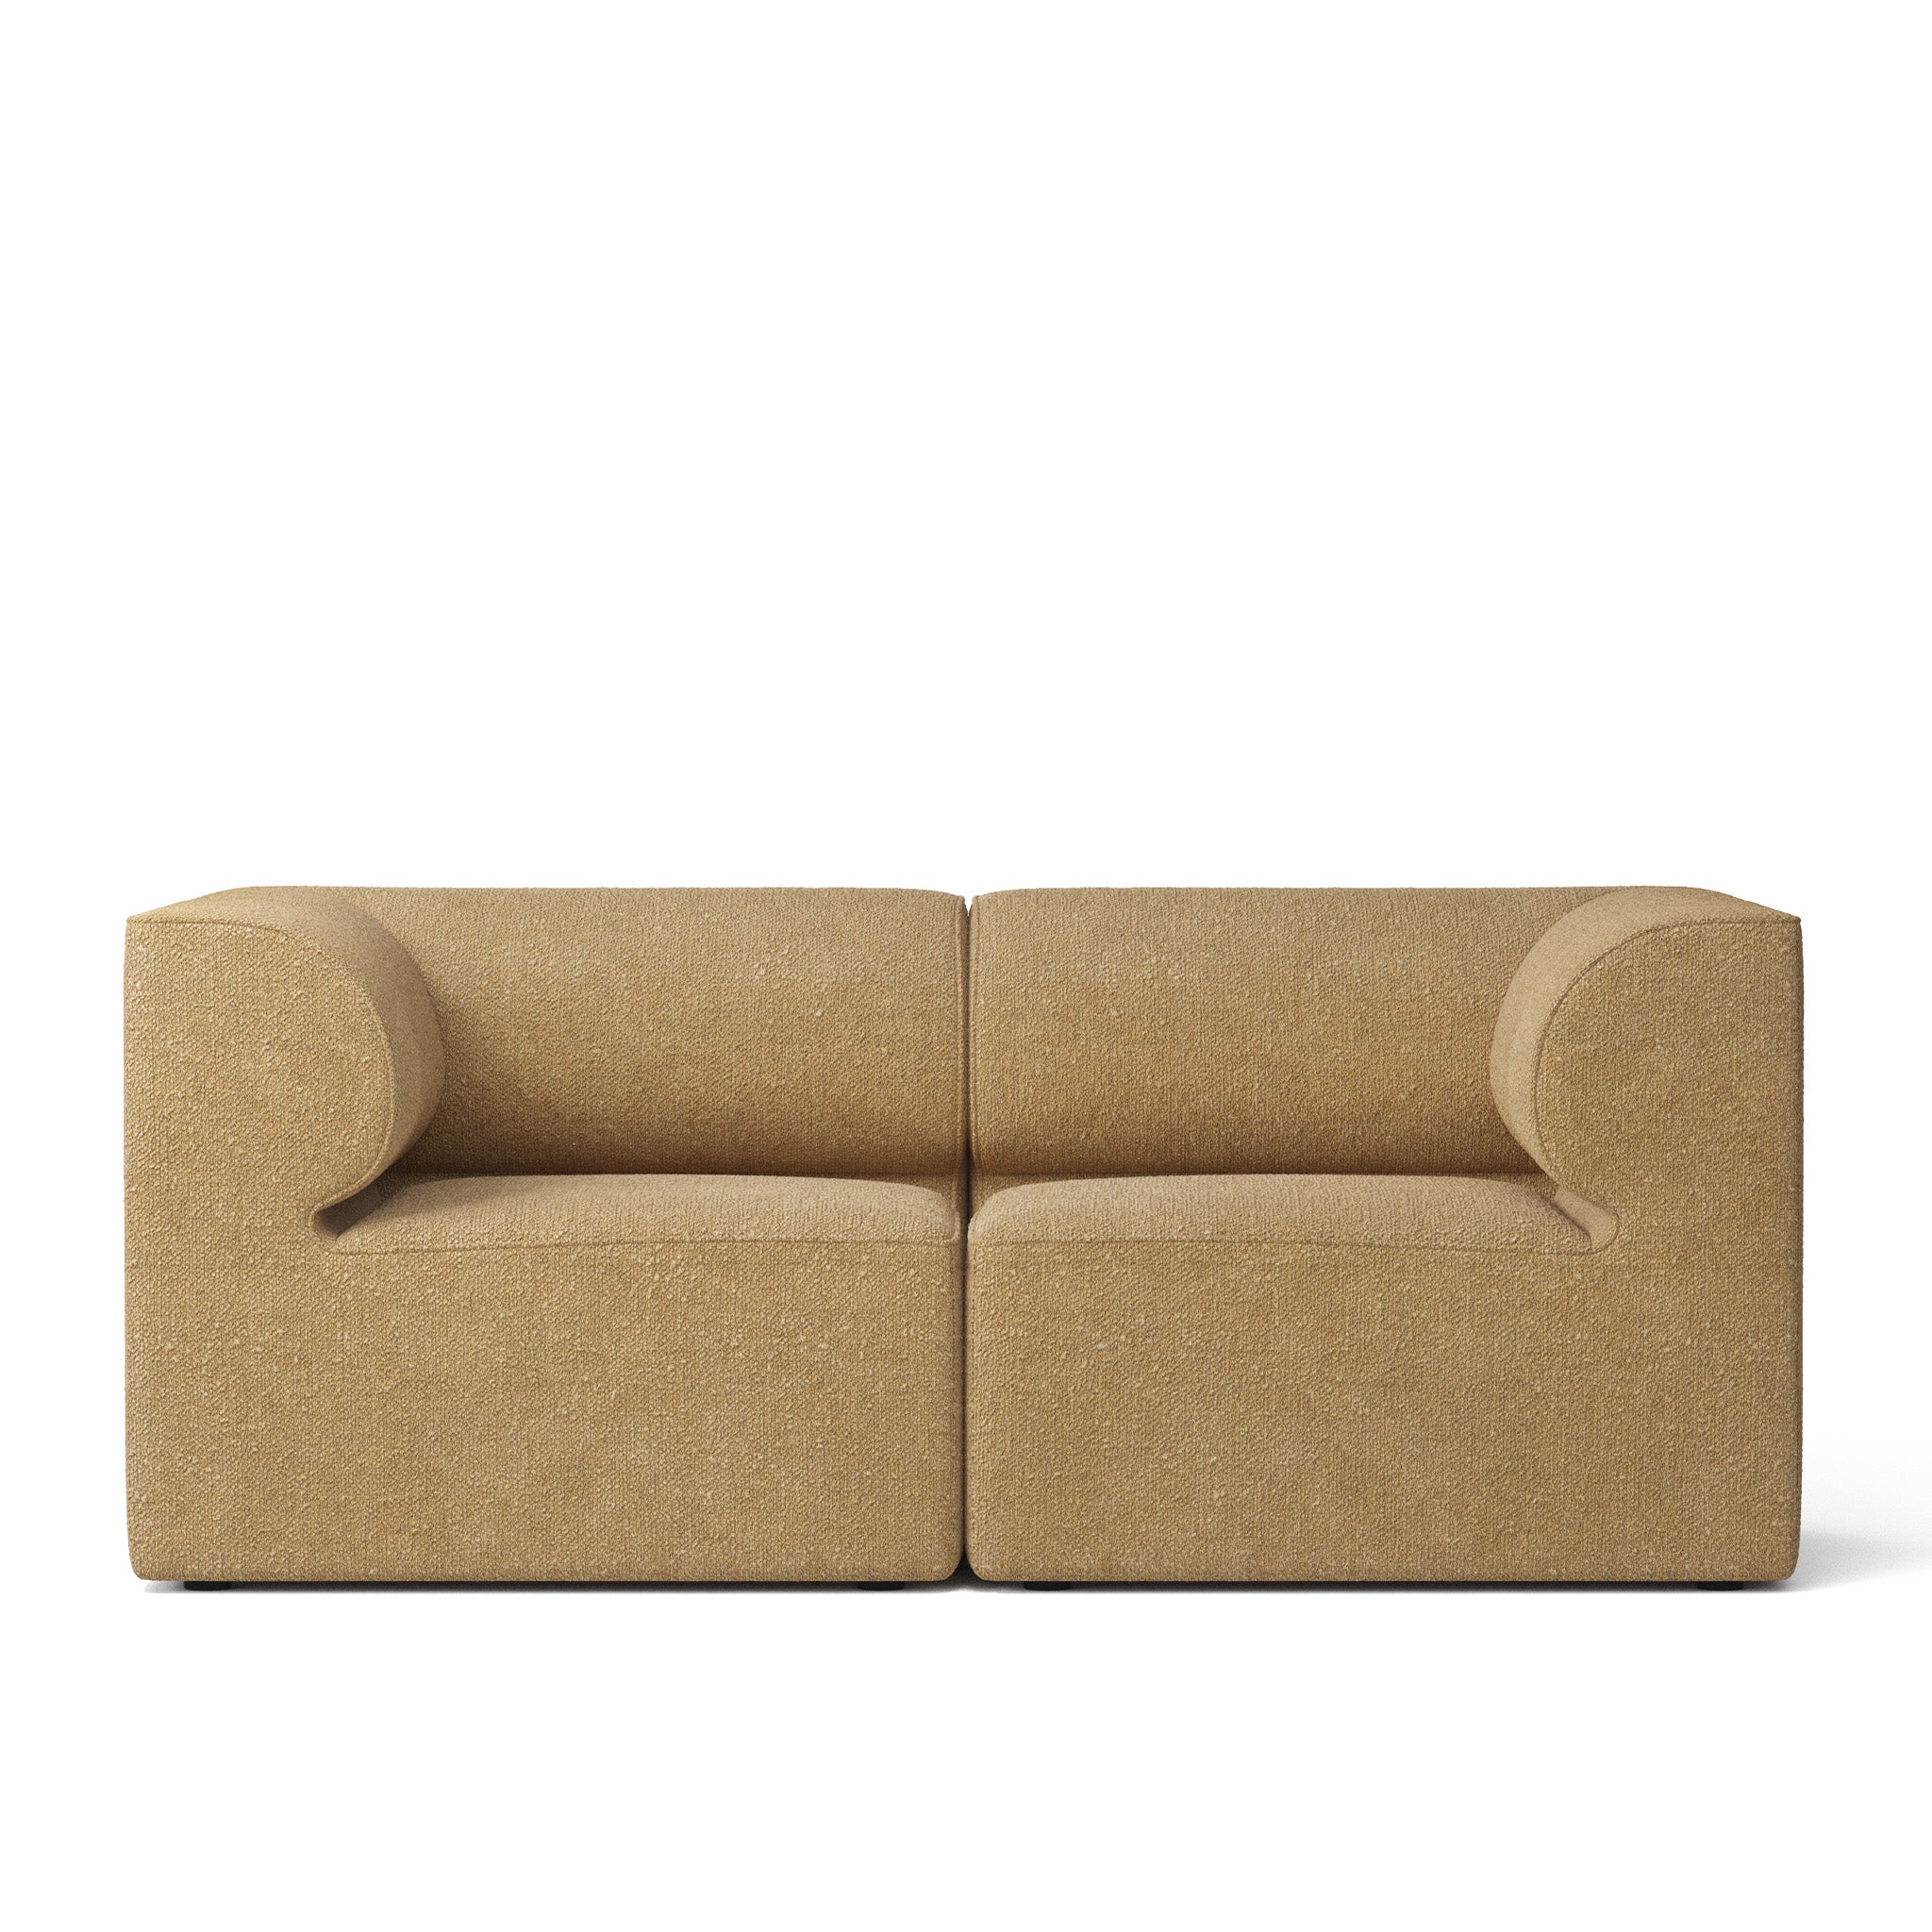 Eave 2 Seater Sofa by Norm Architects